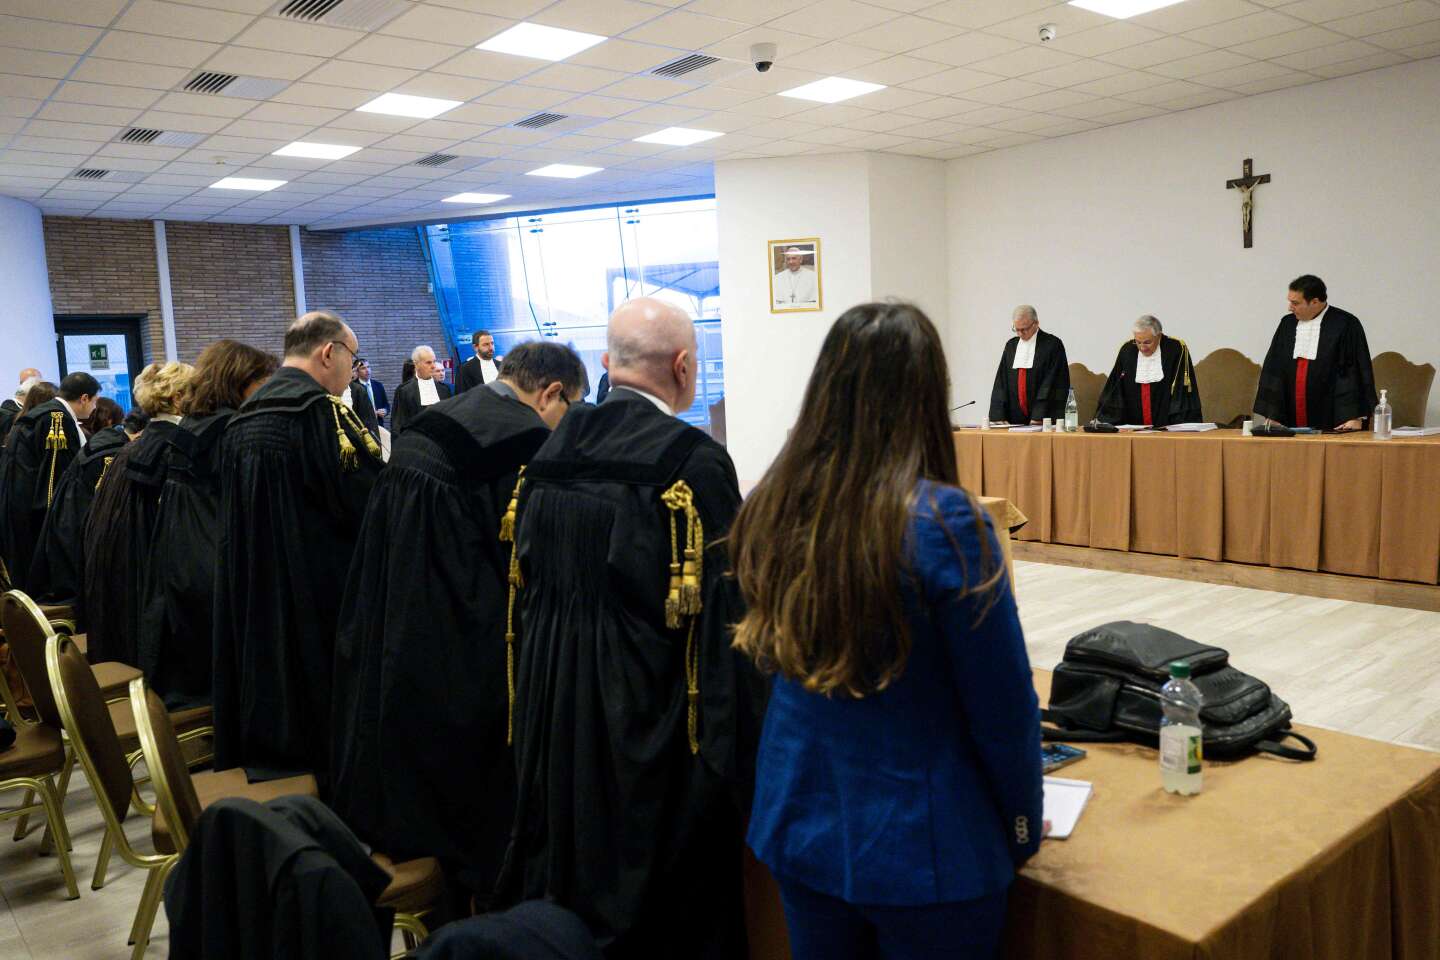 The conviction of Cardinal Angelo Becciu brings to an end an unprecedented trial